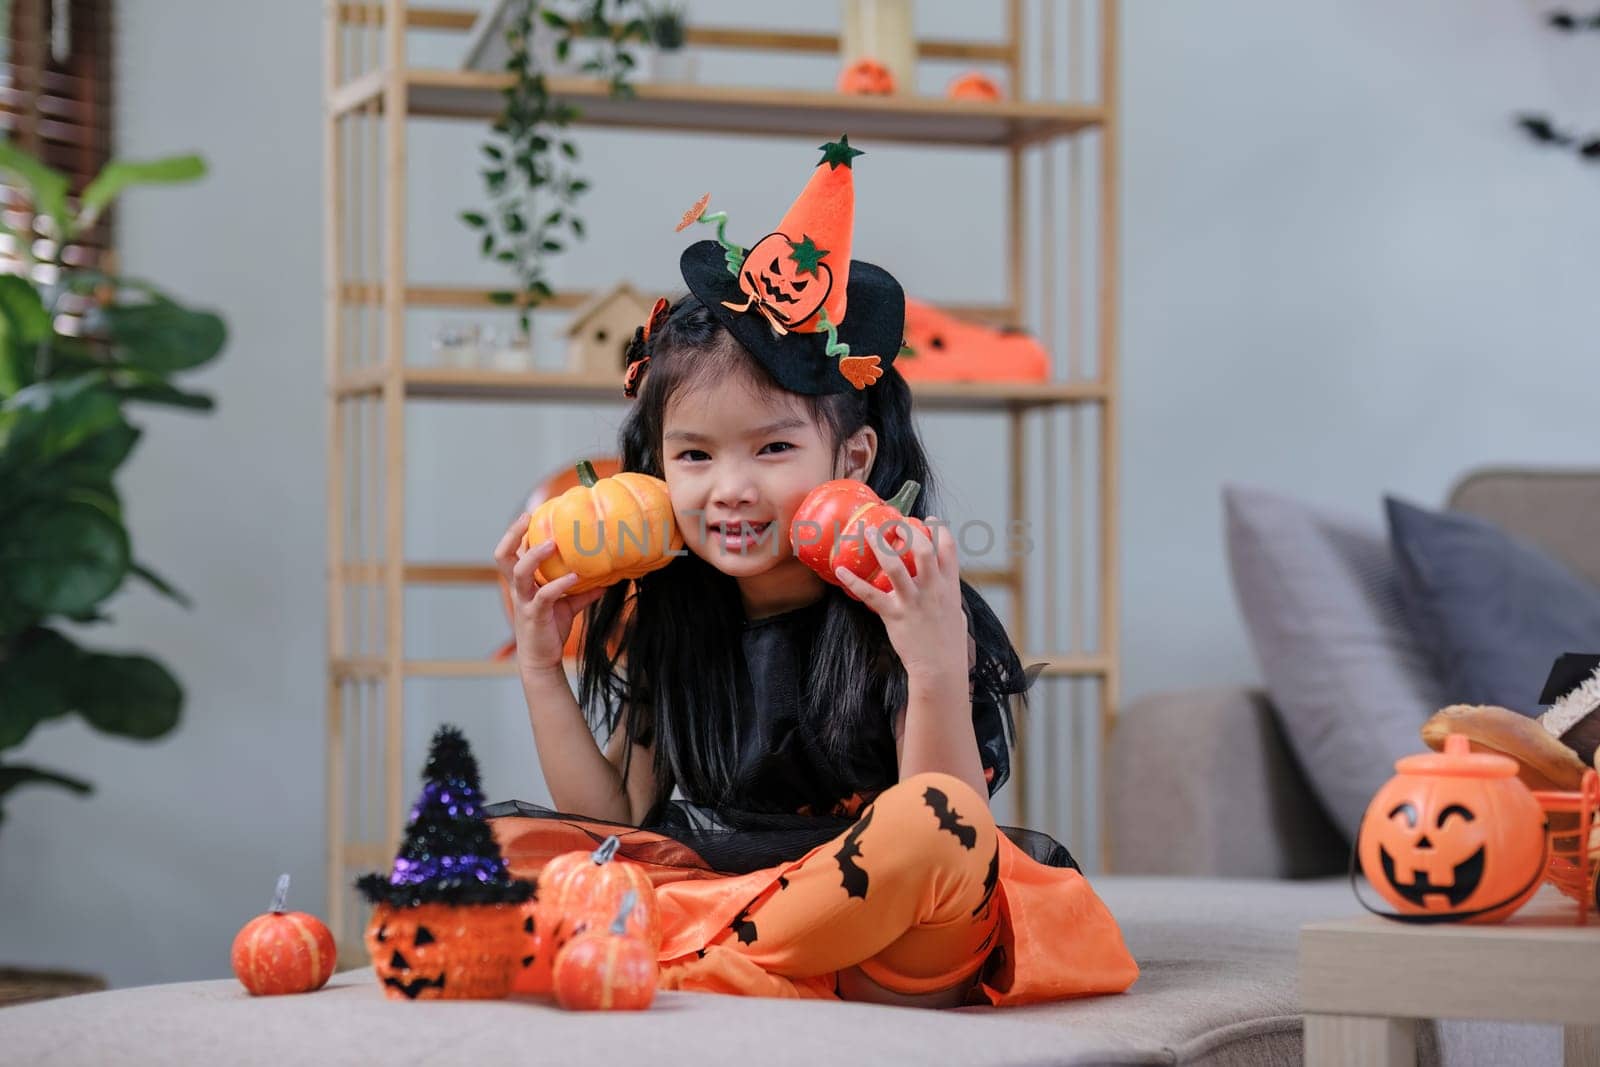 Cute little girl wearing a Halloween costume holding a pumpkin at home with happy eyes. looking at the camera..